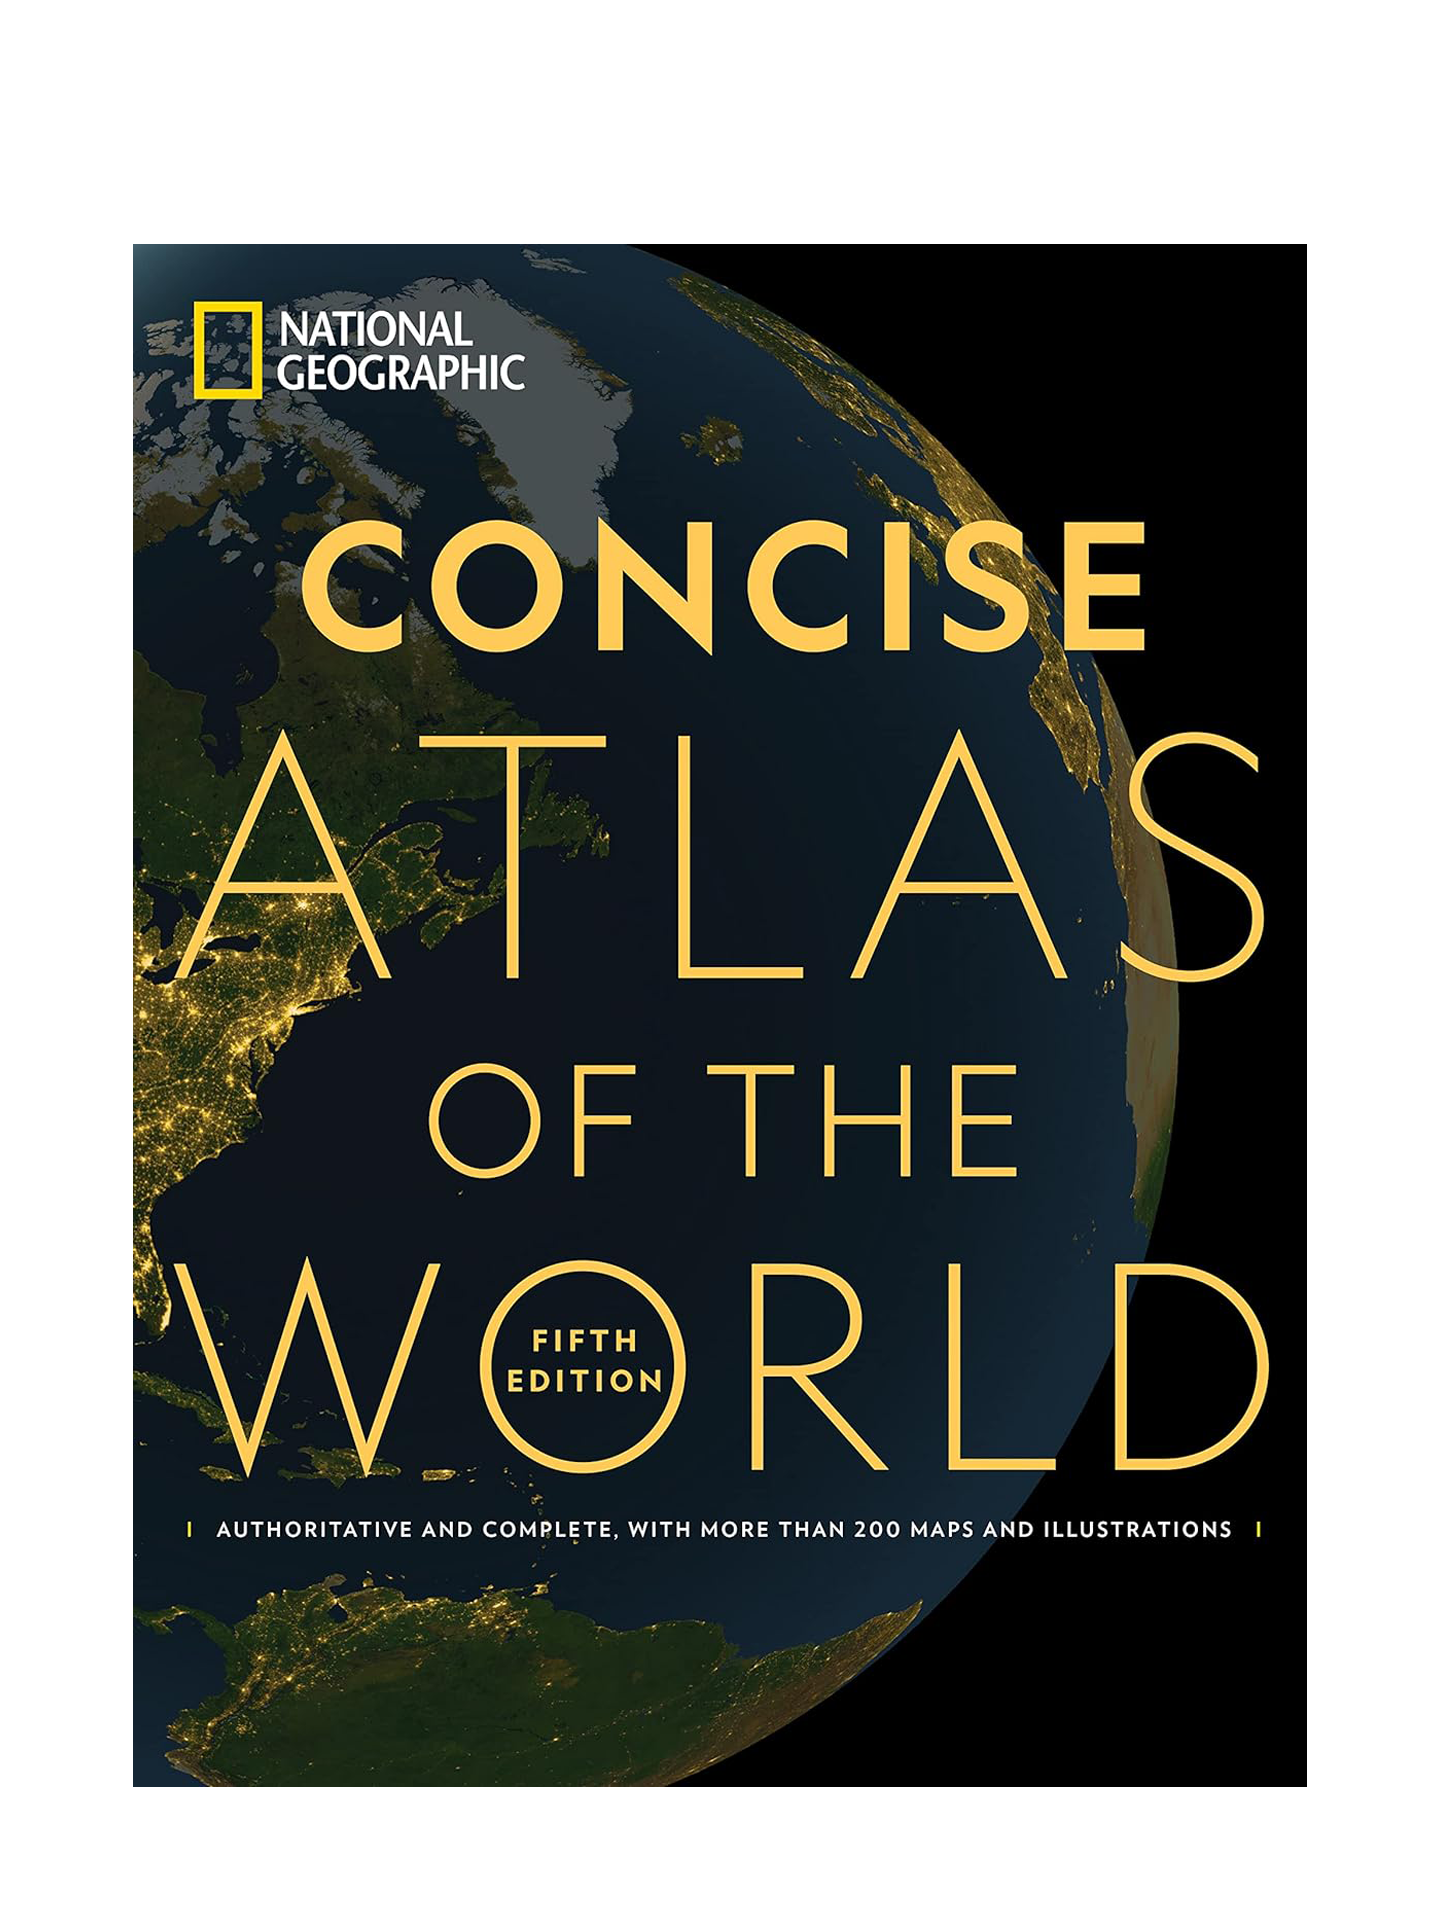 Concise Atlas of the World